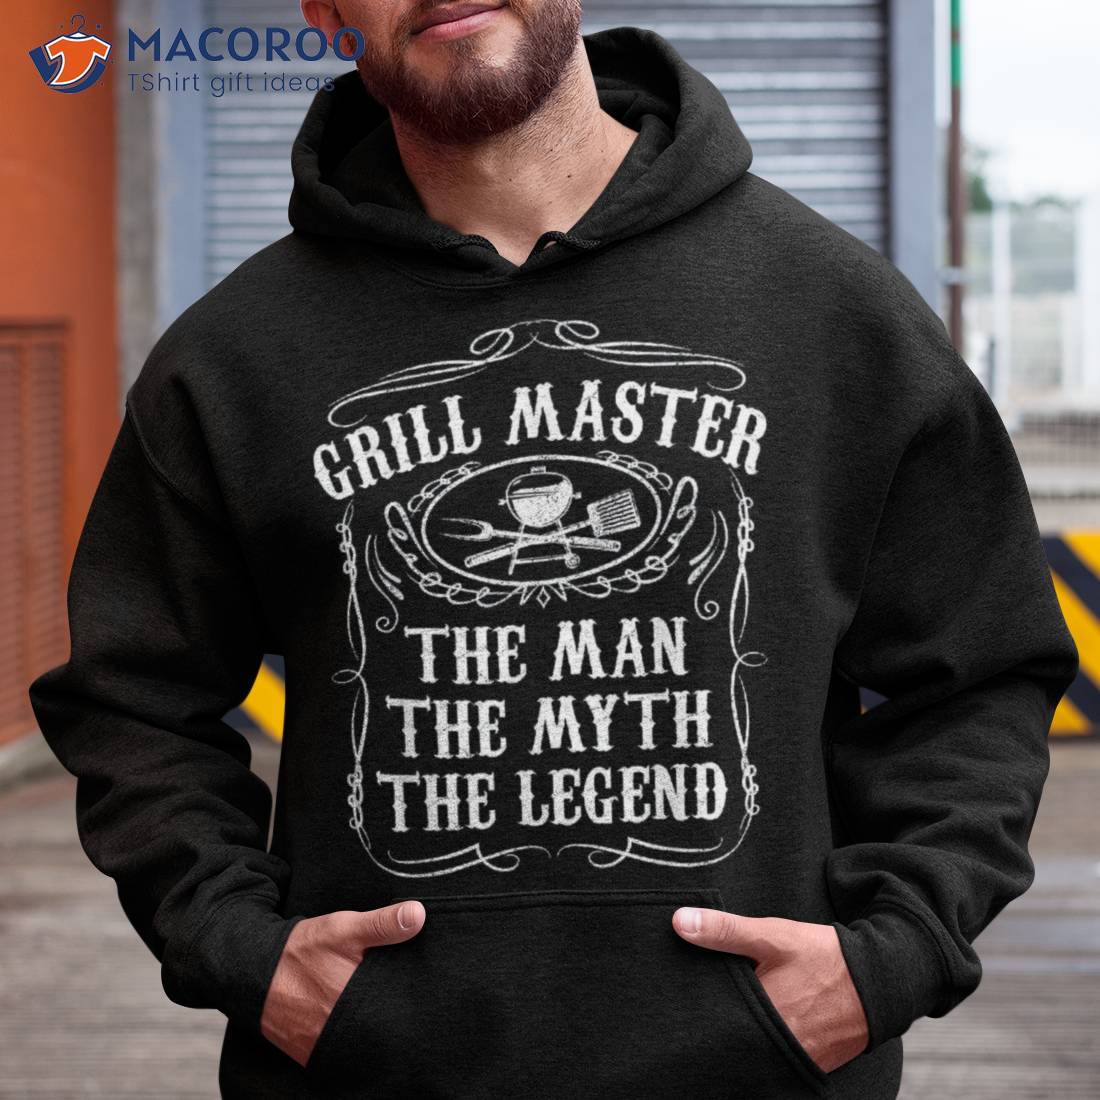 https://images.macoroo.com/wp-content/uploads/2023/06/grill-master-the-man-myth-legend-funny-bbq-smoker-gift-shirt-hoodie.jpg